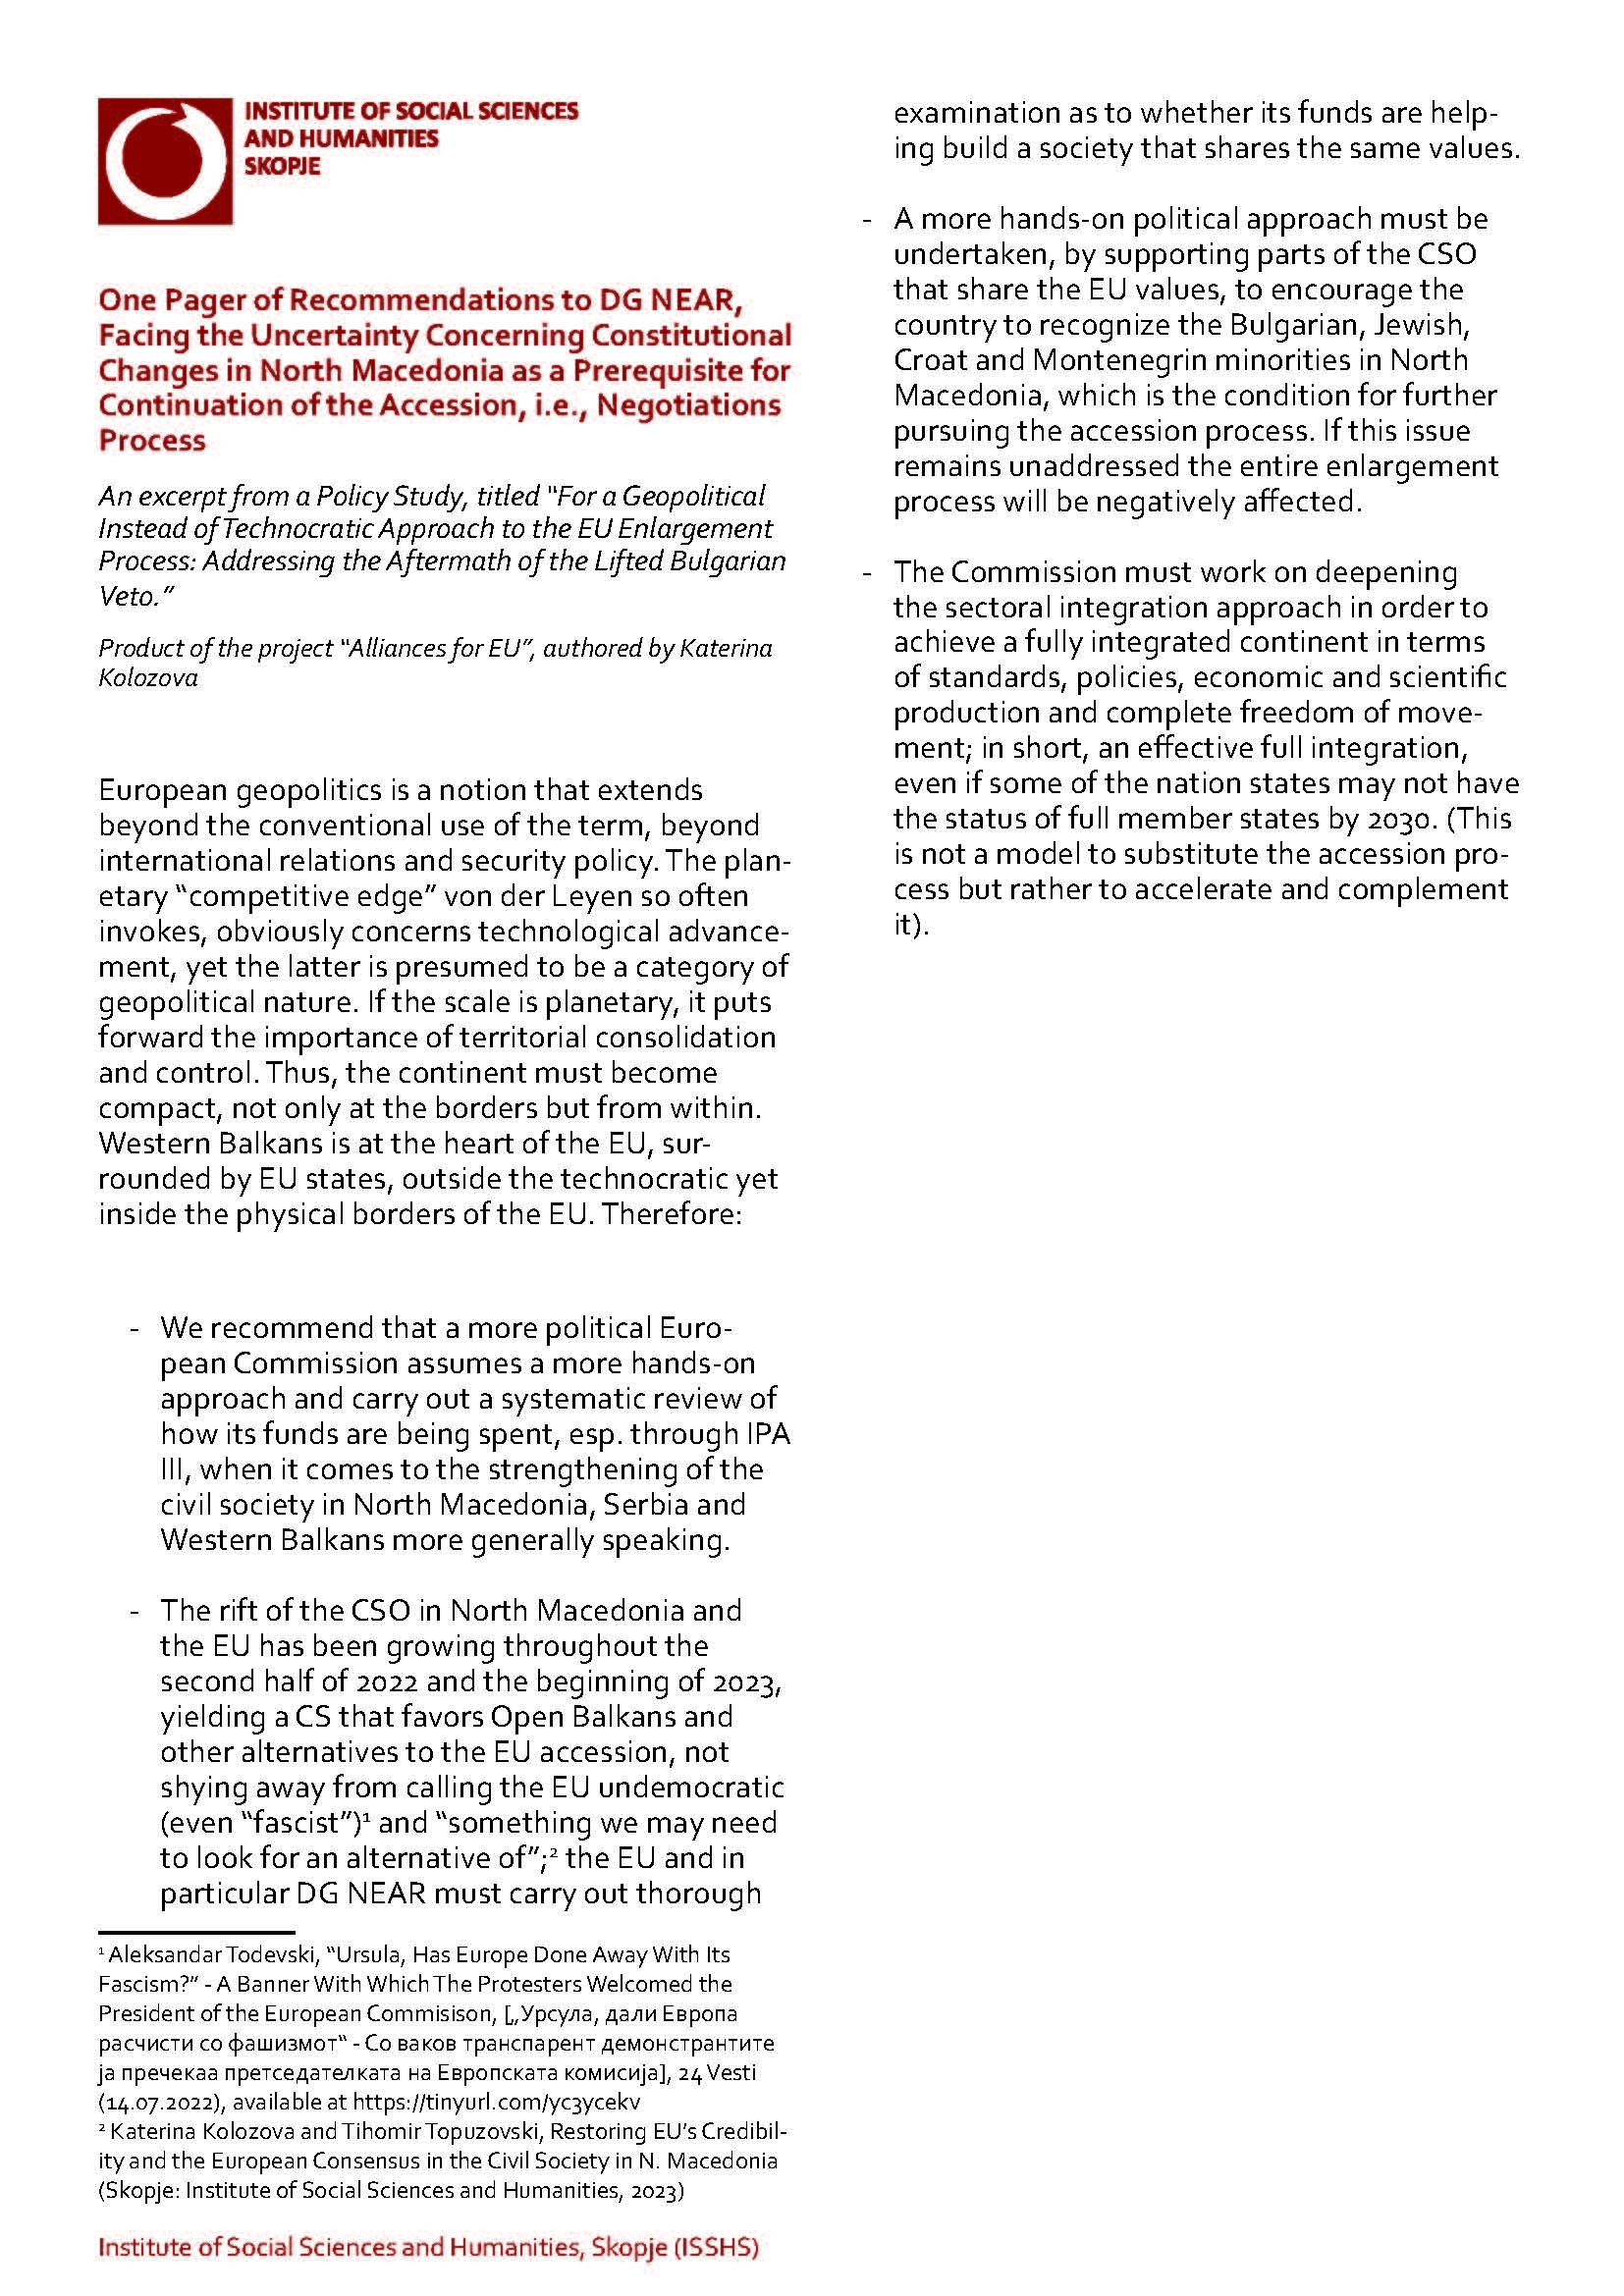 ONE PAGER OF RECOMMENDATIONS TO DG NEAR, FACING THE UNCERTAINTY CONCERNING CONSTITUTIONAL CHANGES IN NORTH MACEDONIA AS A PREREQUISITE FOR CONTINUATION OF THE ACCESSION, I.E., NEGOTIATIONS PROCESS